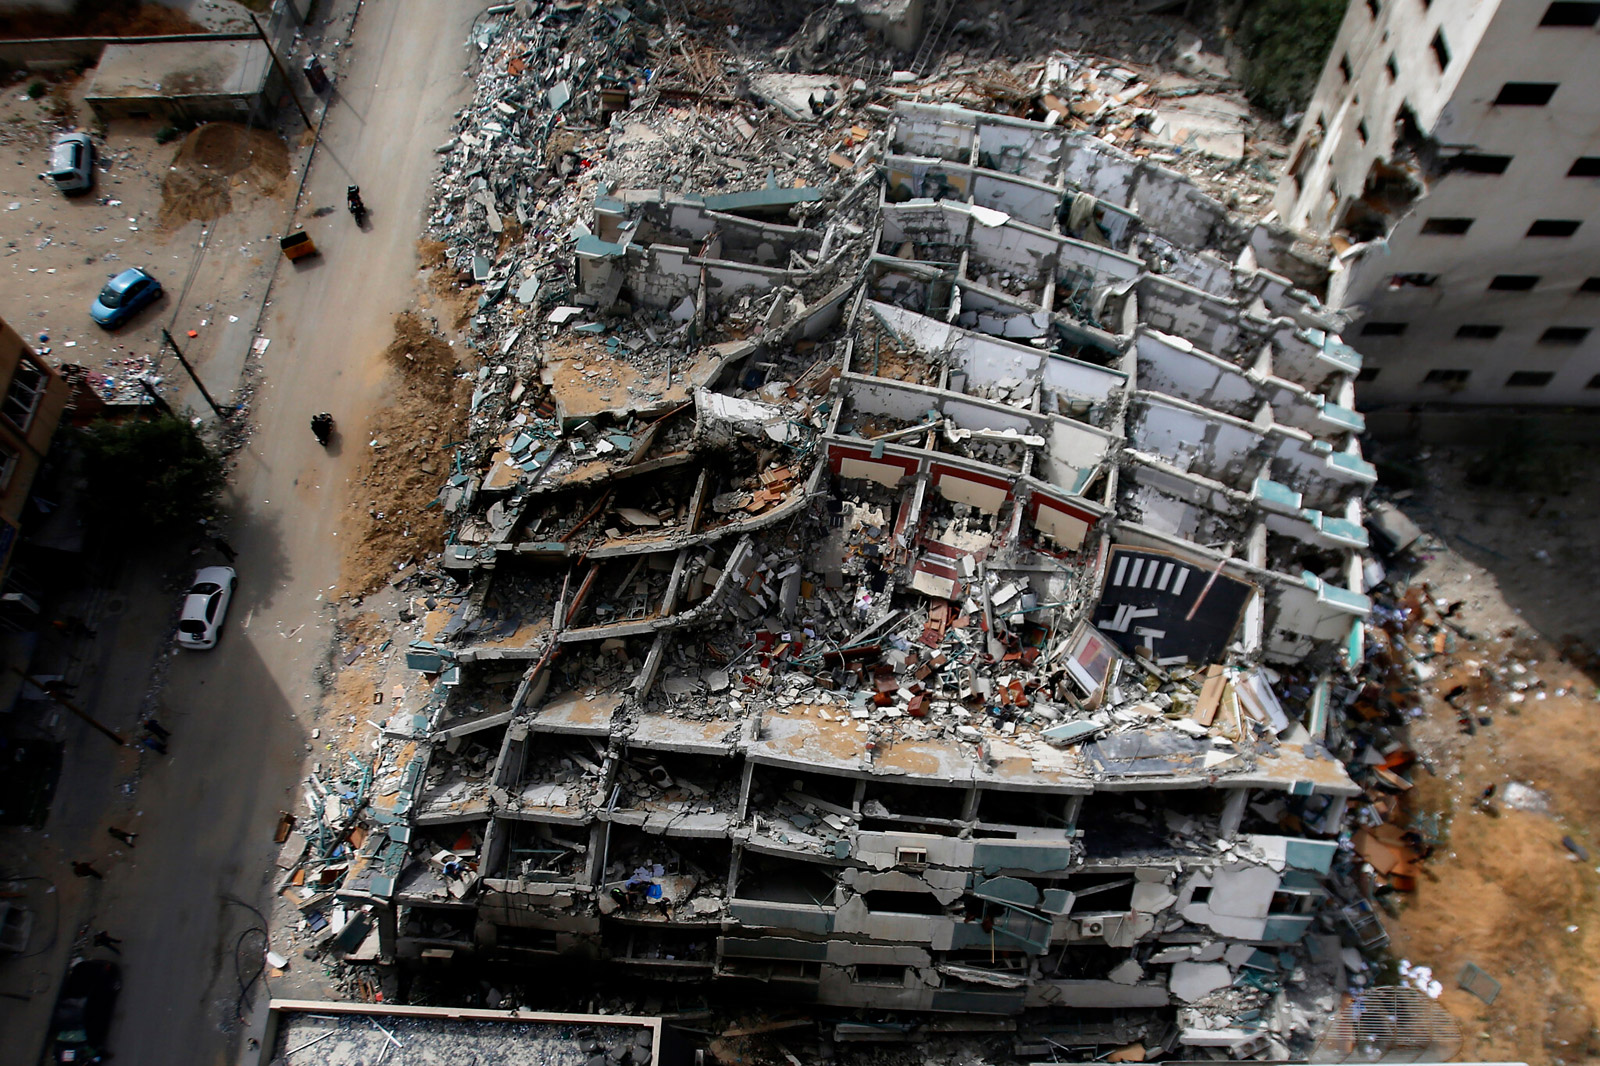 A May two thousand twenty-one photograph of the rubble of Jalaa Tower in Gaza after it was bombed by Israel. In addition to residential apartments, the building housed the offices of Associated Press, Al Jazeera, and other media organizations.